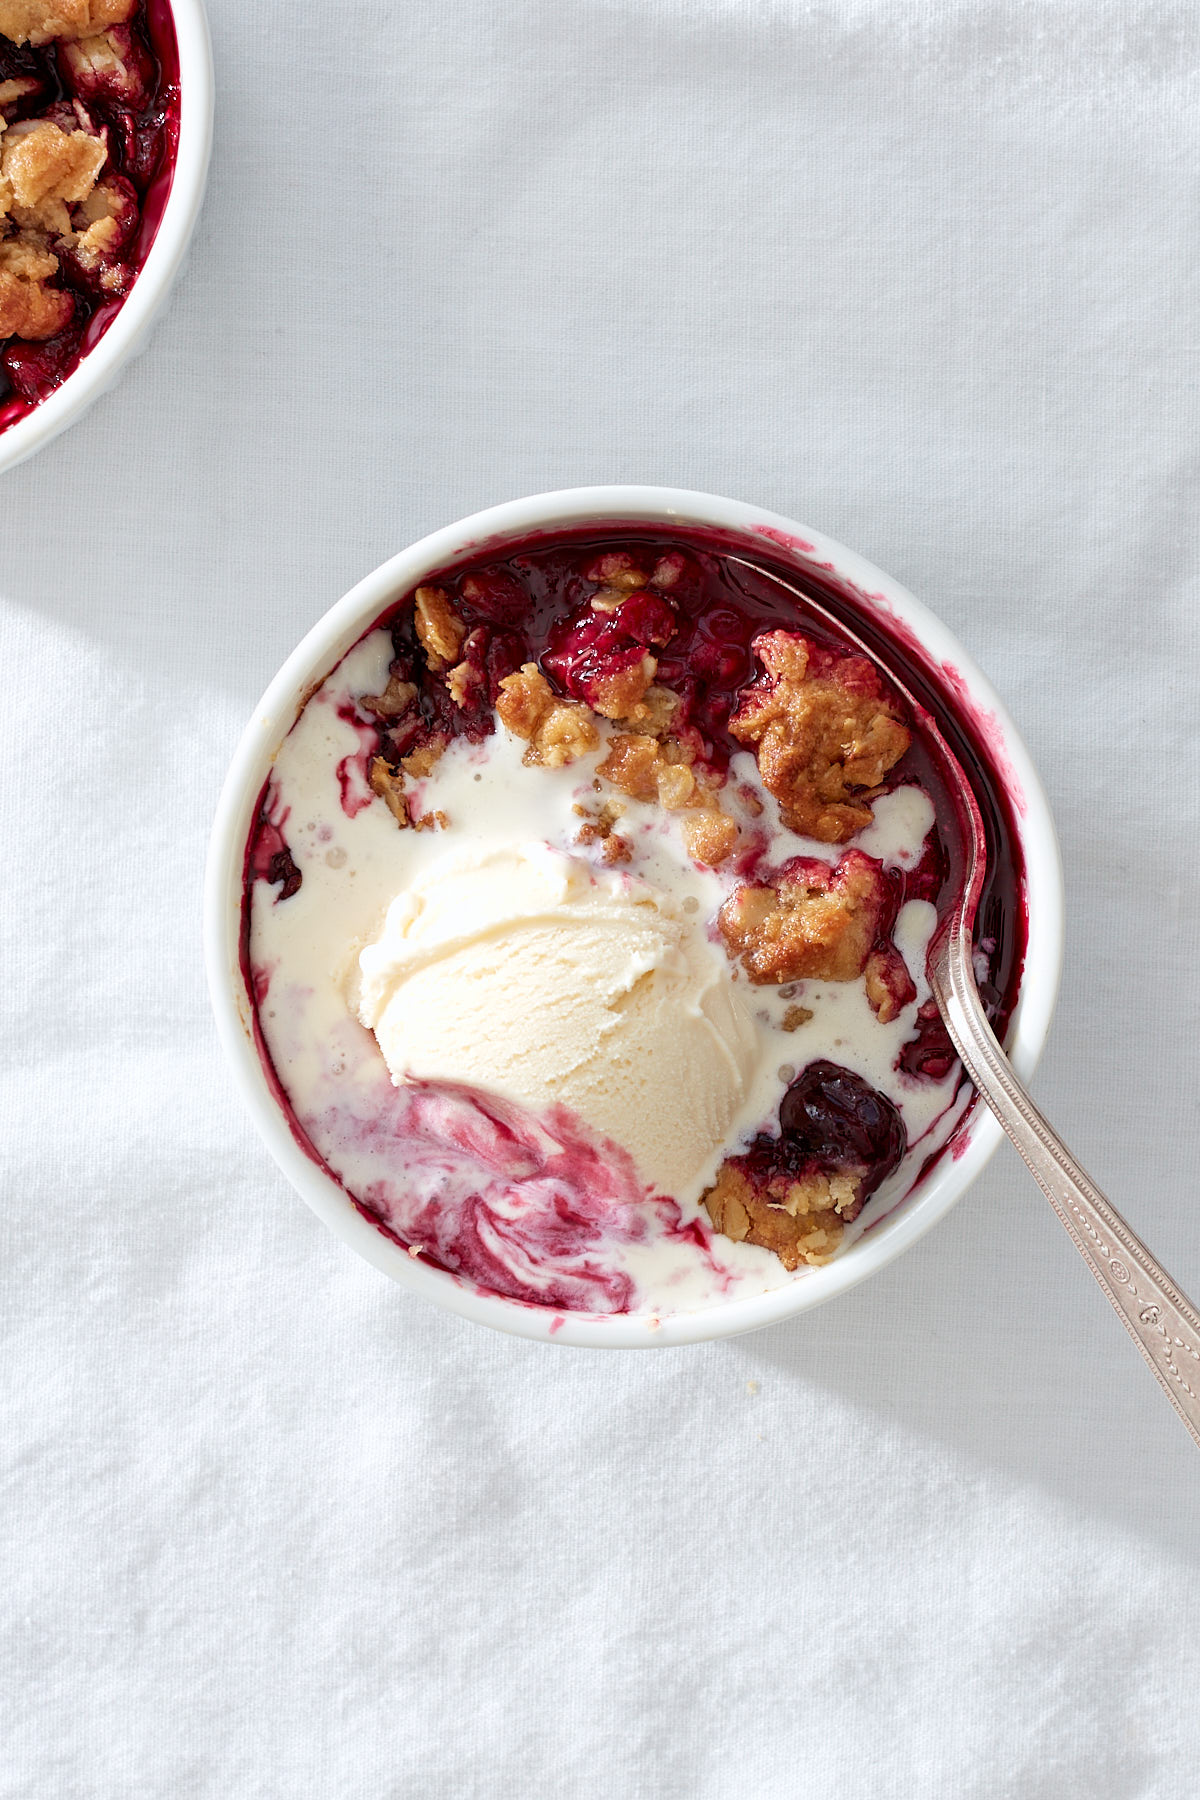 A close up of an individual mixed berry crumble with vanilla ice cream.